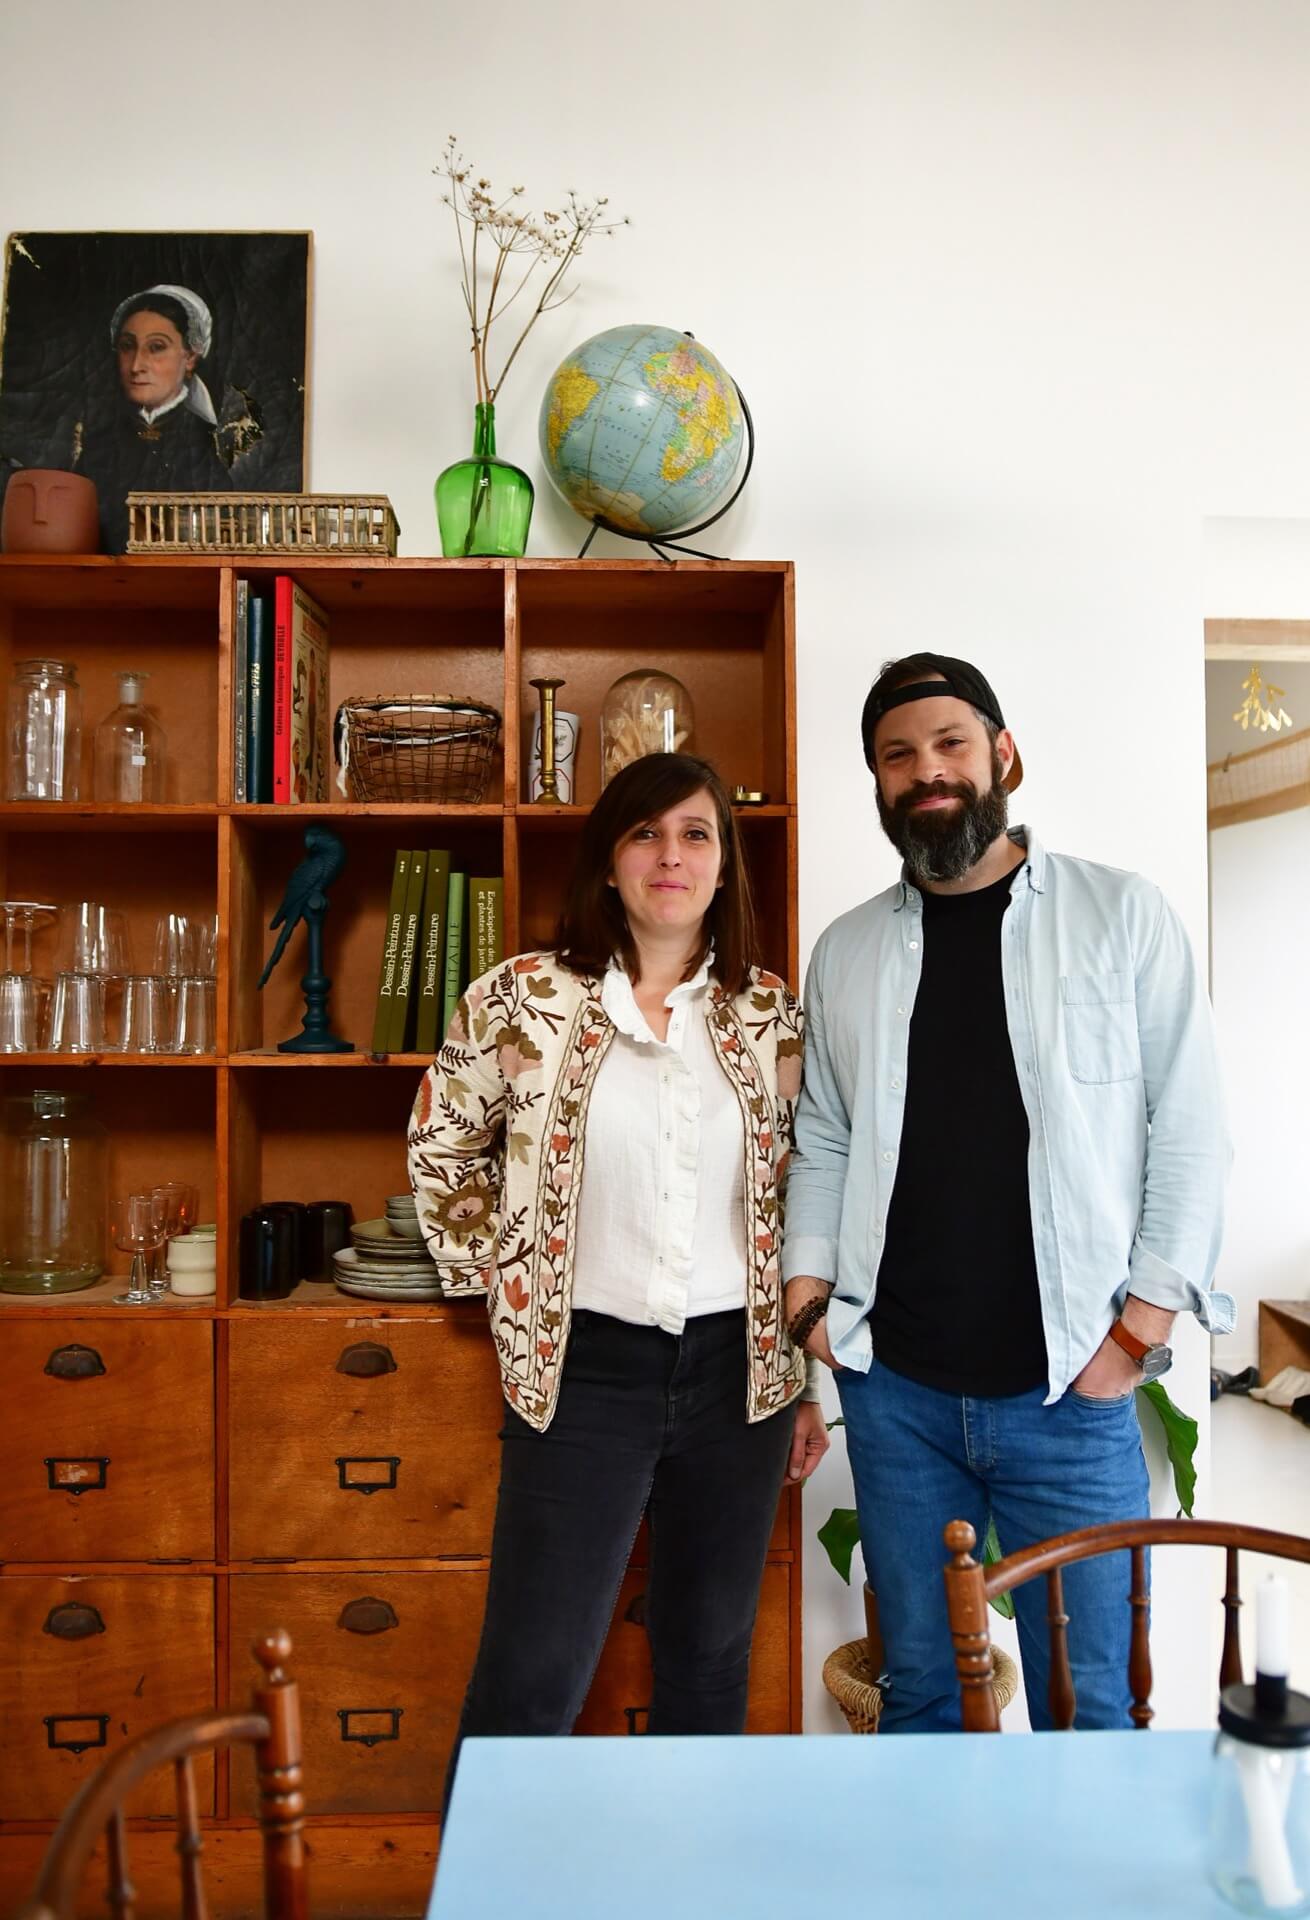 Marion Larpent ad partner in their French gite decorated with vintage furniture and objects.